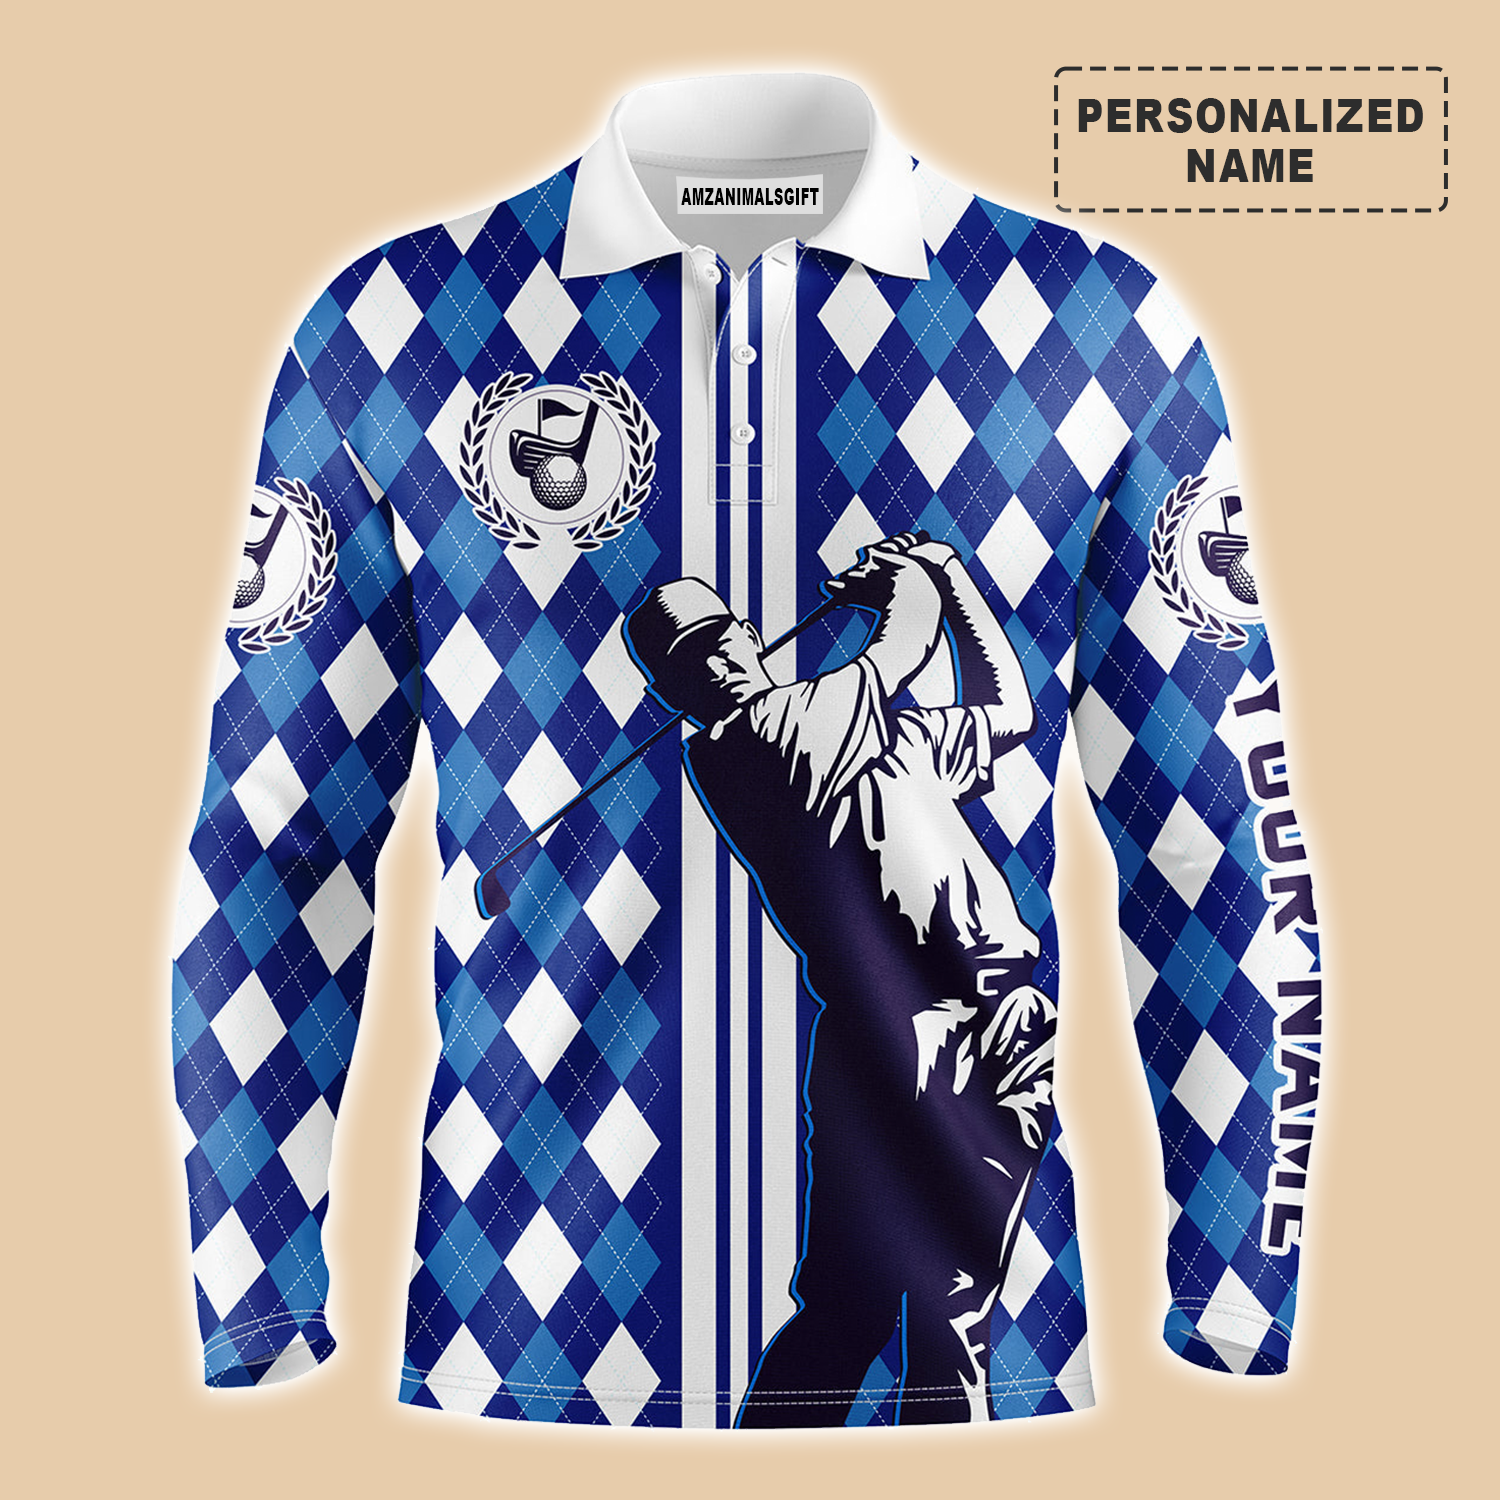 Personalized Name Golf Long sleeve Polo Shirts, Blue Argyle Pattern Men Golfing Apparel, Perfect Gift And Outfit For Golf Lovers, Team, Golfer